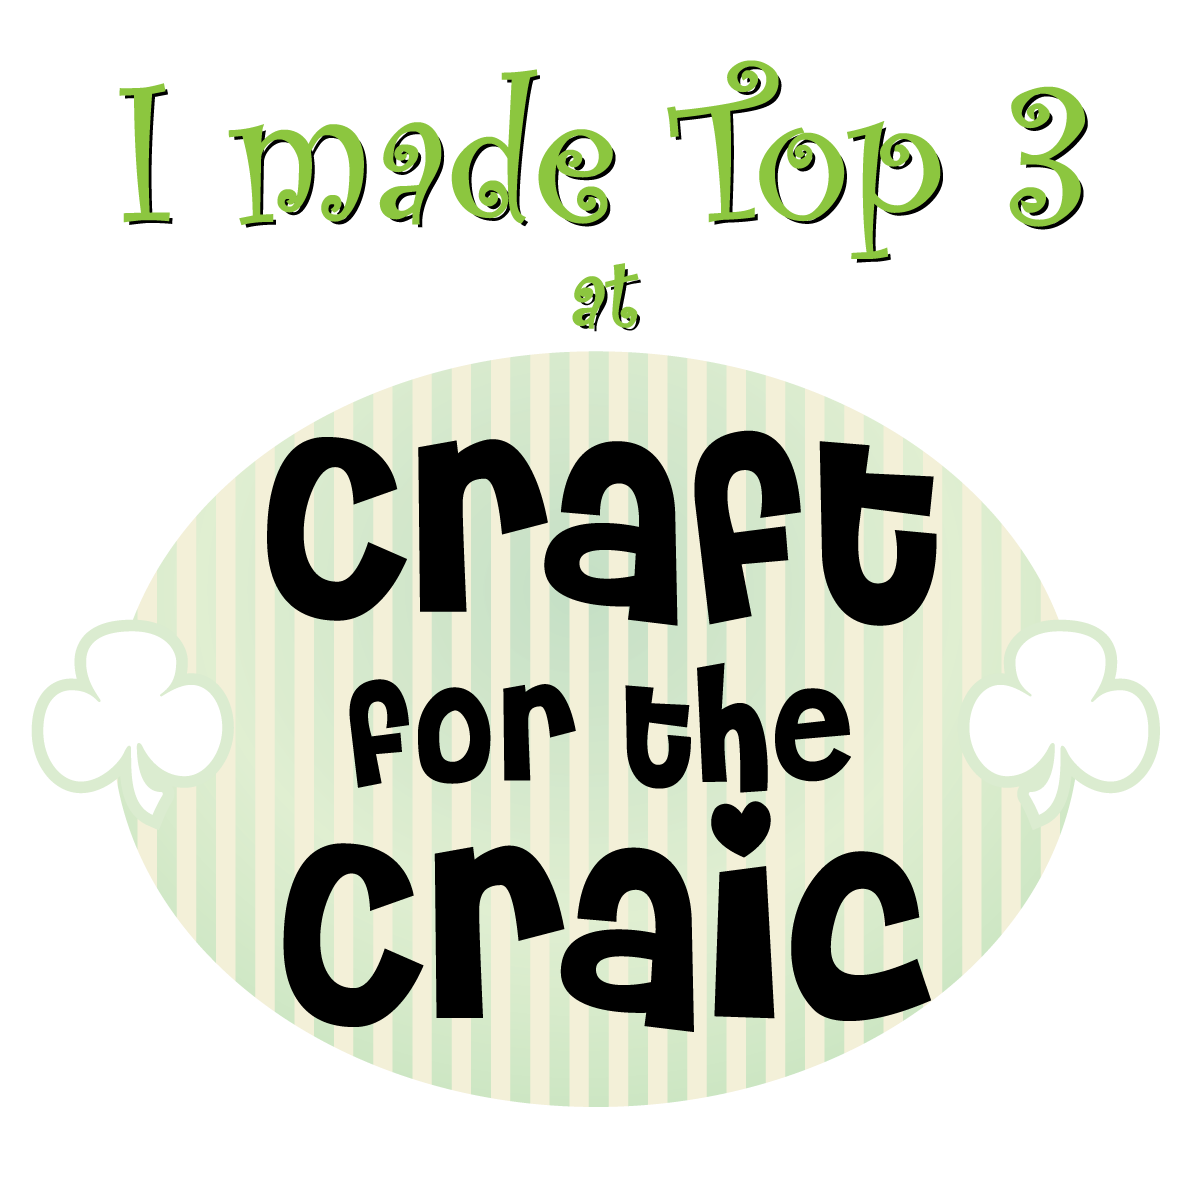 Craft for the craic